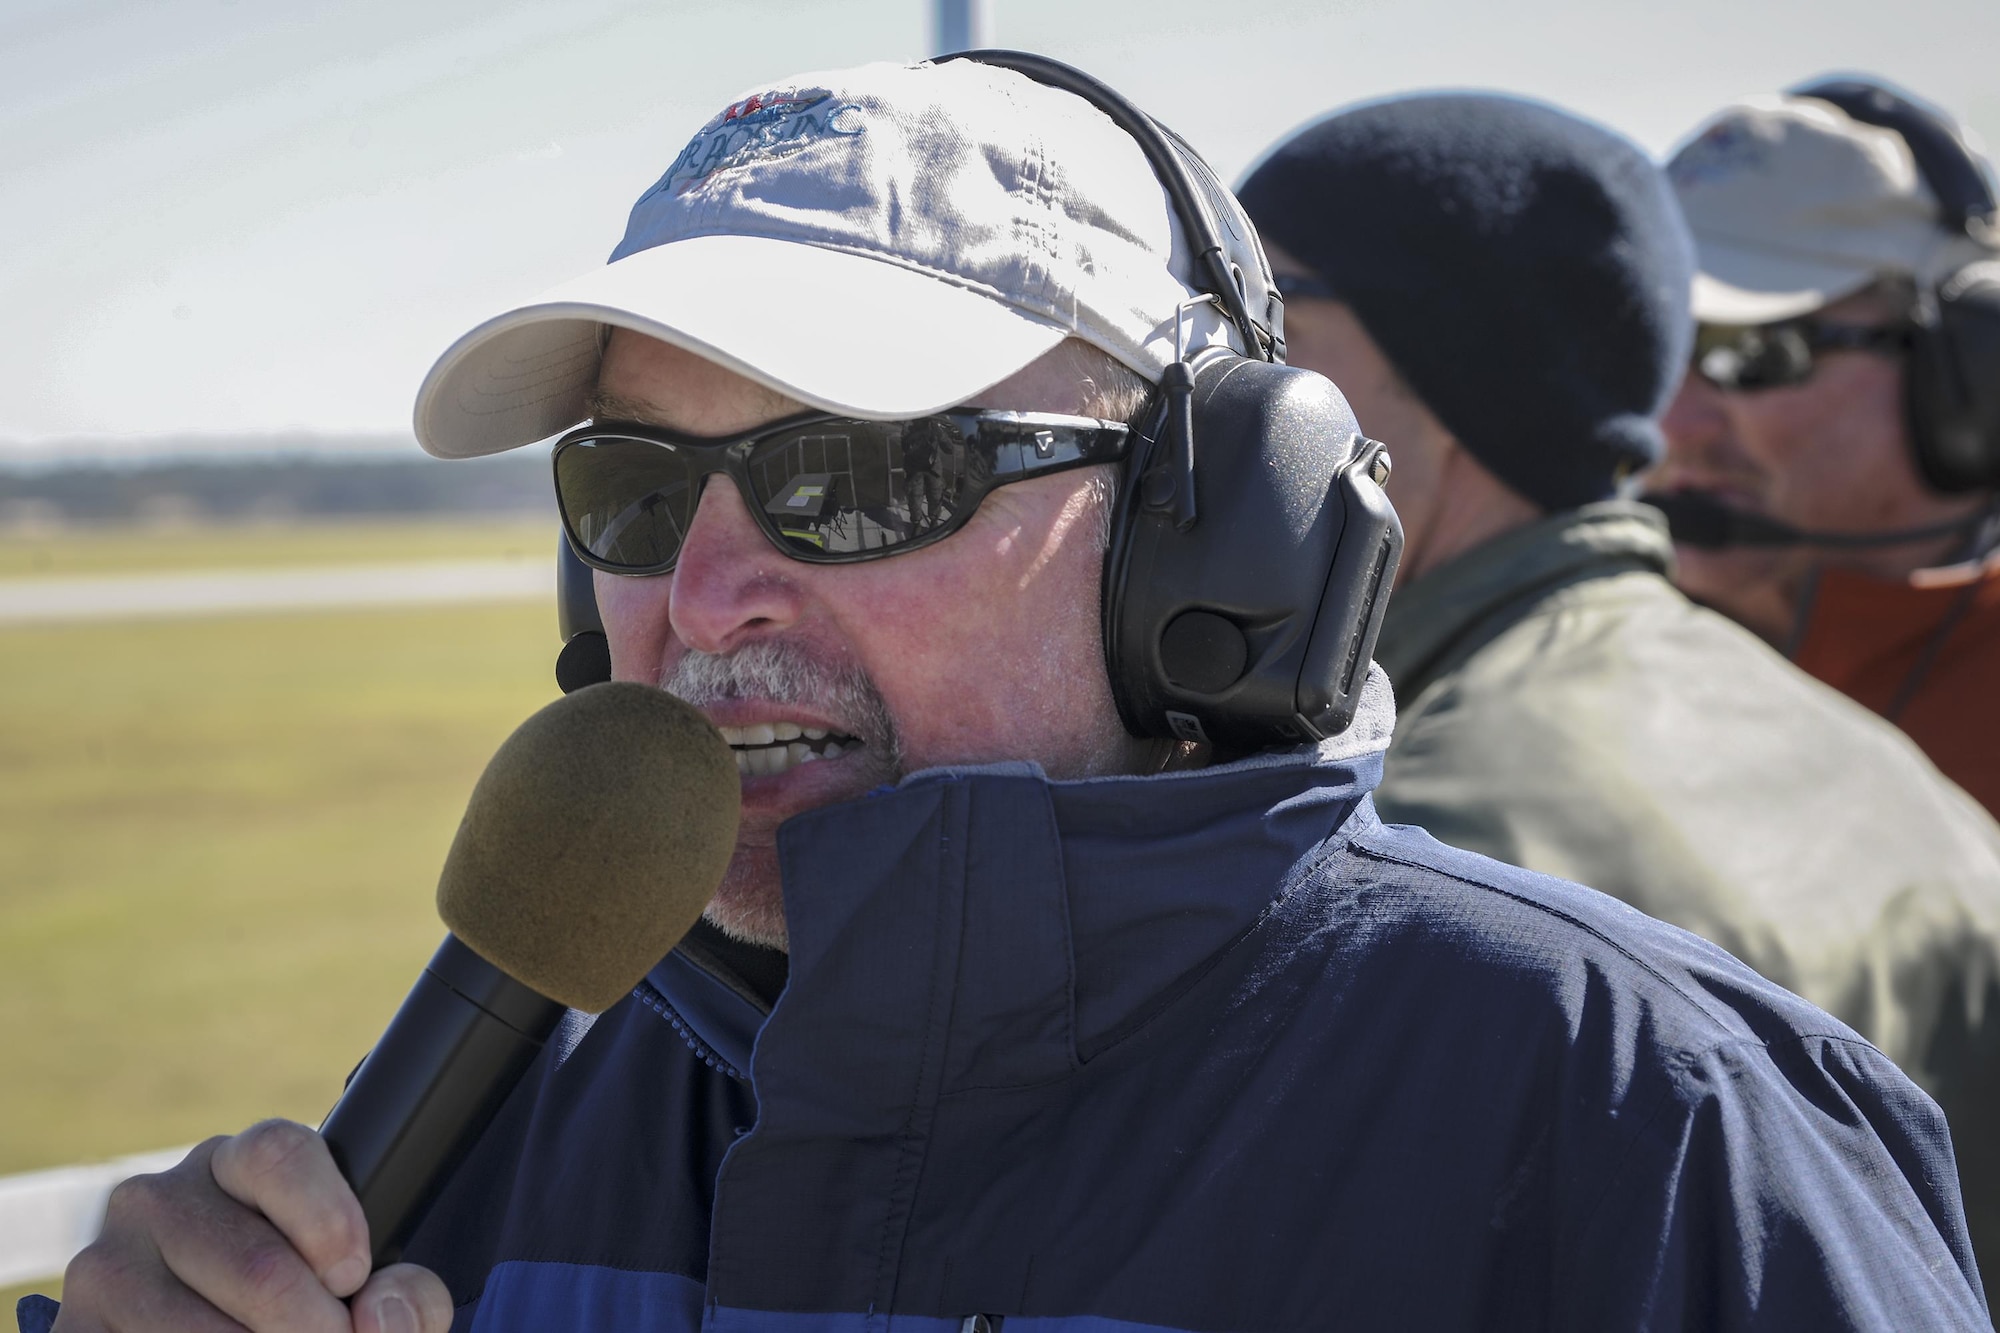 Lee “T.R.” Turner, air show narrator, introduces the U.S. Air Force Thunderbirds during the Thunder Over South Georgia Air Show, Oct. 29, 2017 at Moody Air Force Base, Ga. The Thunderbirds performed twists, turns and rolls at high speeds demonstrating the prowess and capabilities of the F-16 Fighting Falcon. (U.S. Air Force photo by Airman Eugene Oliver)